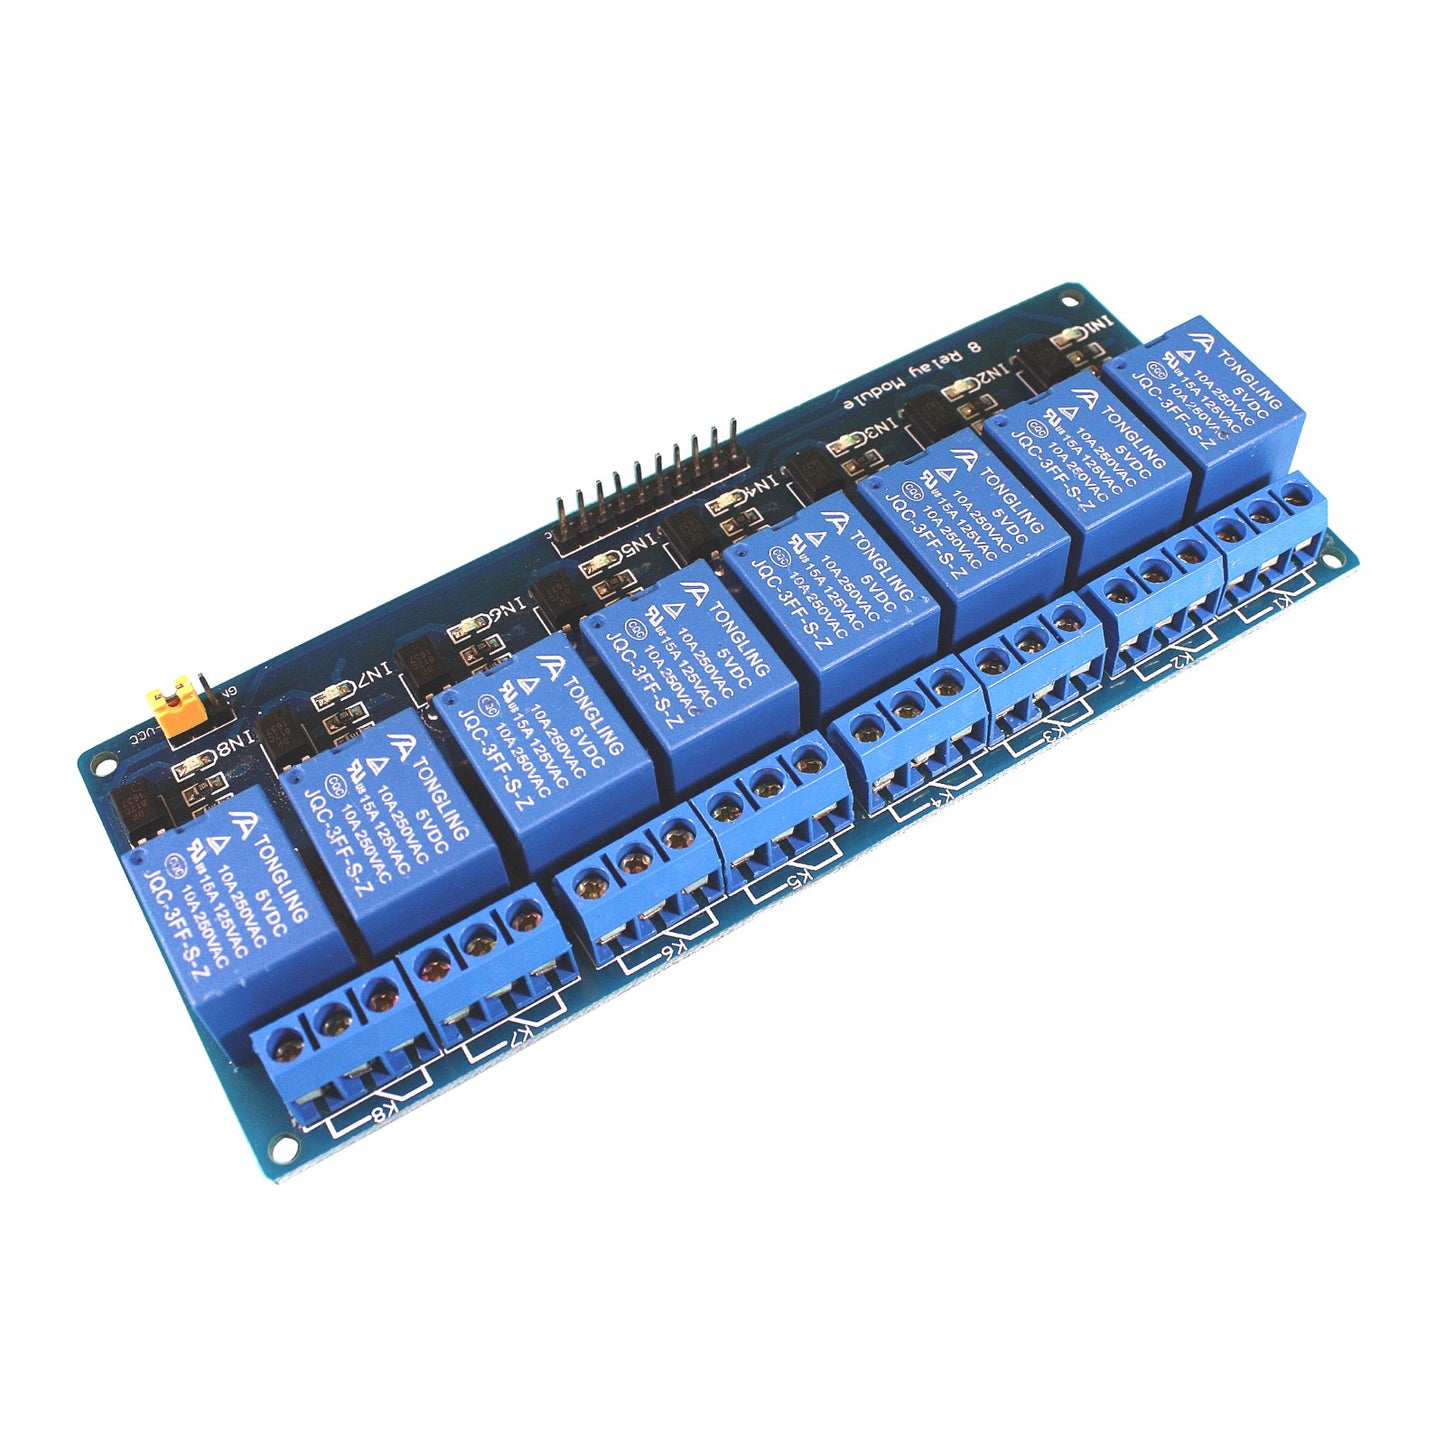 8-Channel Relais Module with with Opto-isolators, 5V